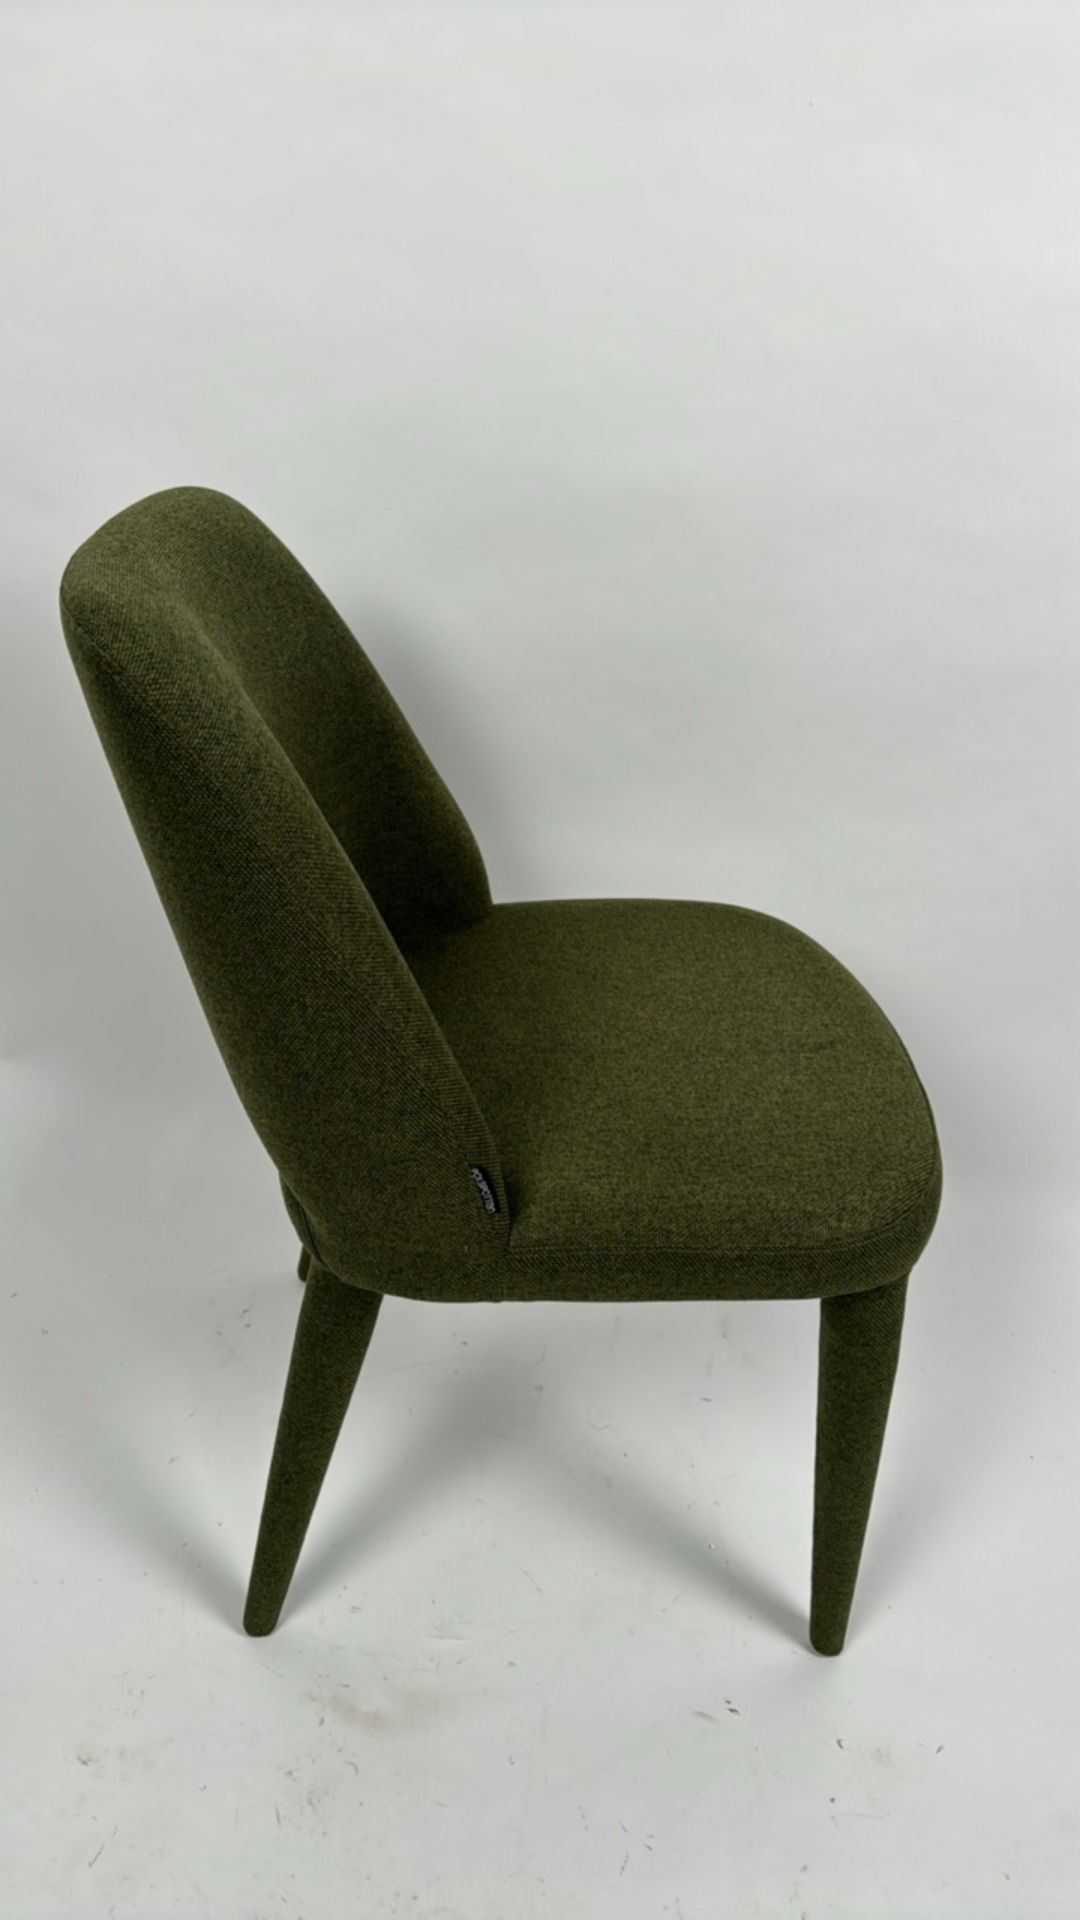 Pols Potten Holy Padded Chair Forest Green - Image 4 of 5